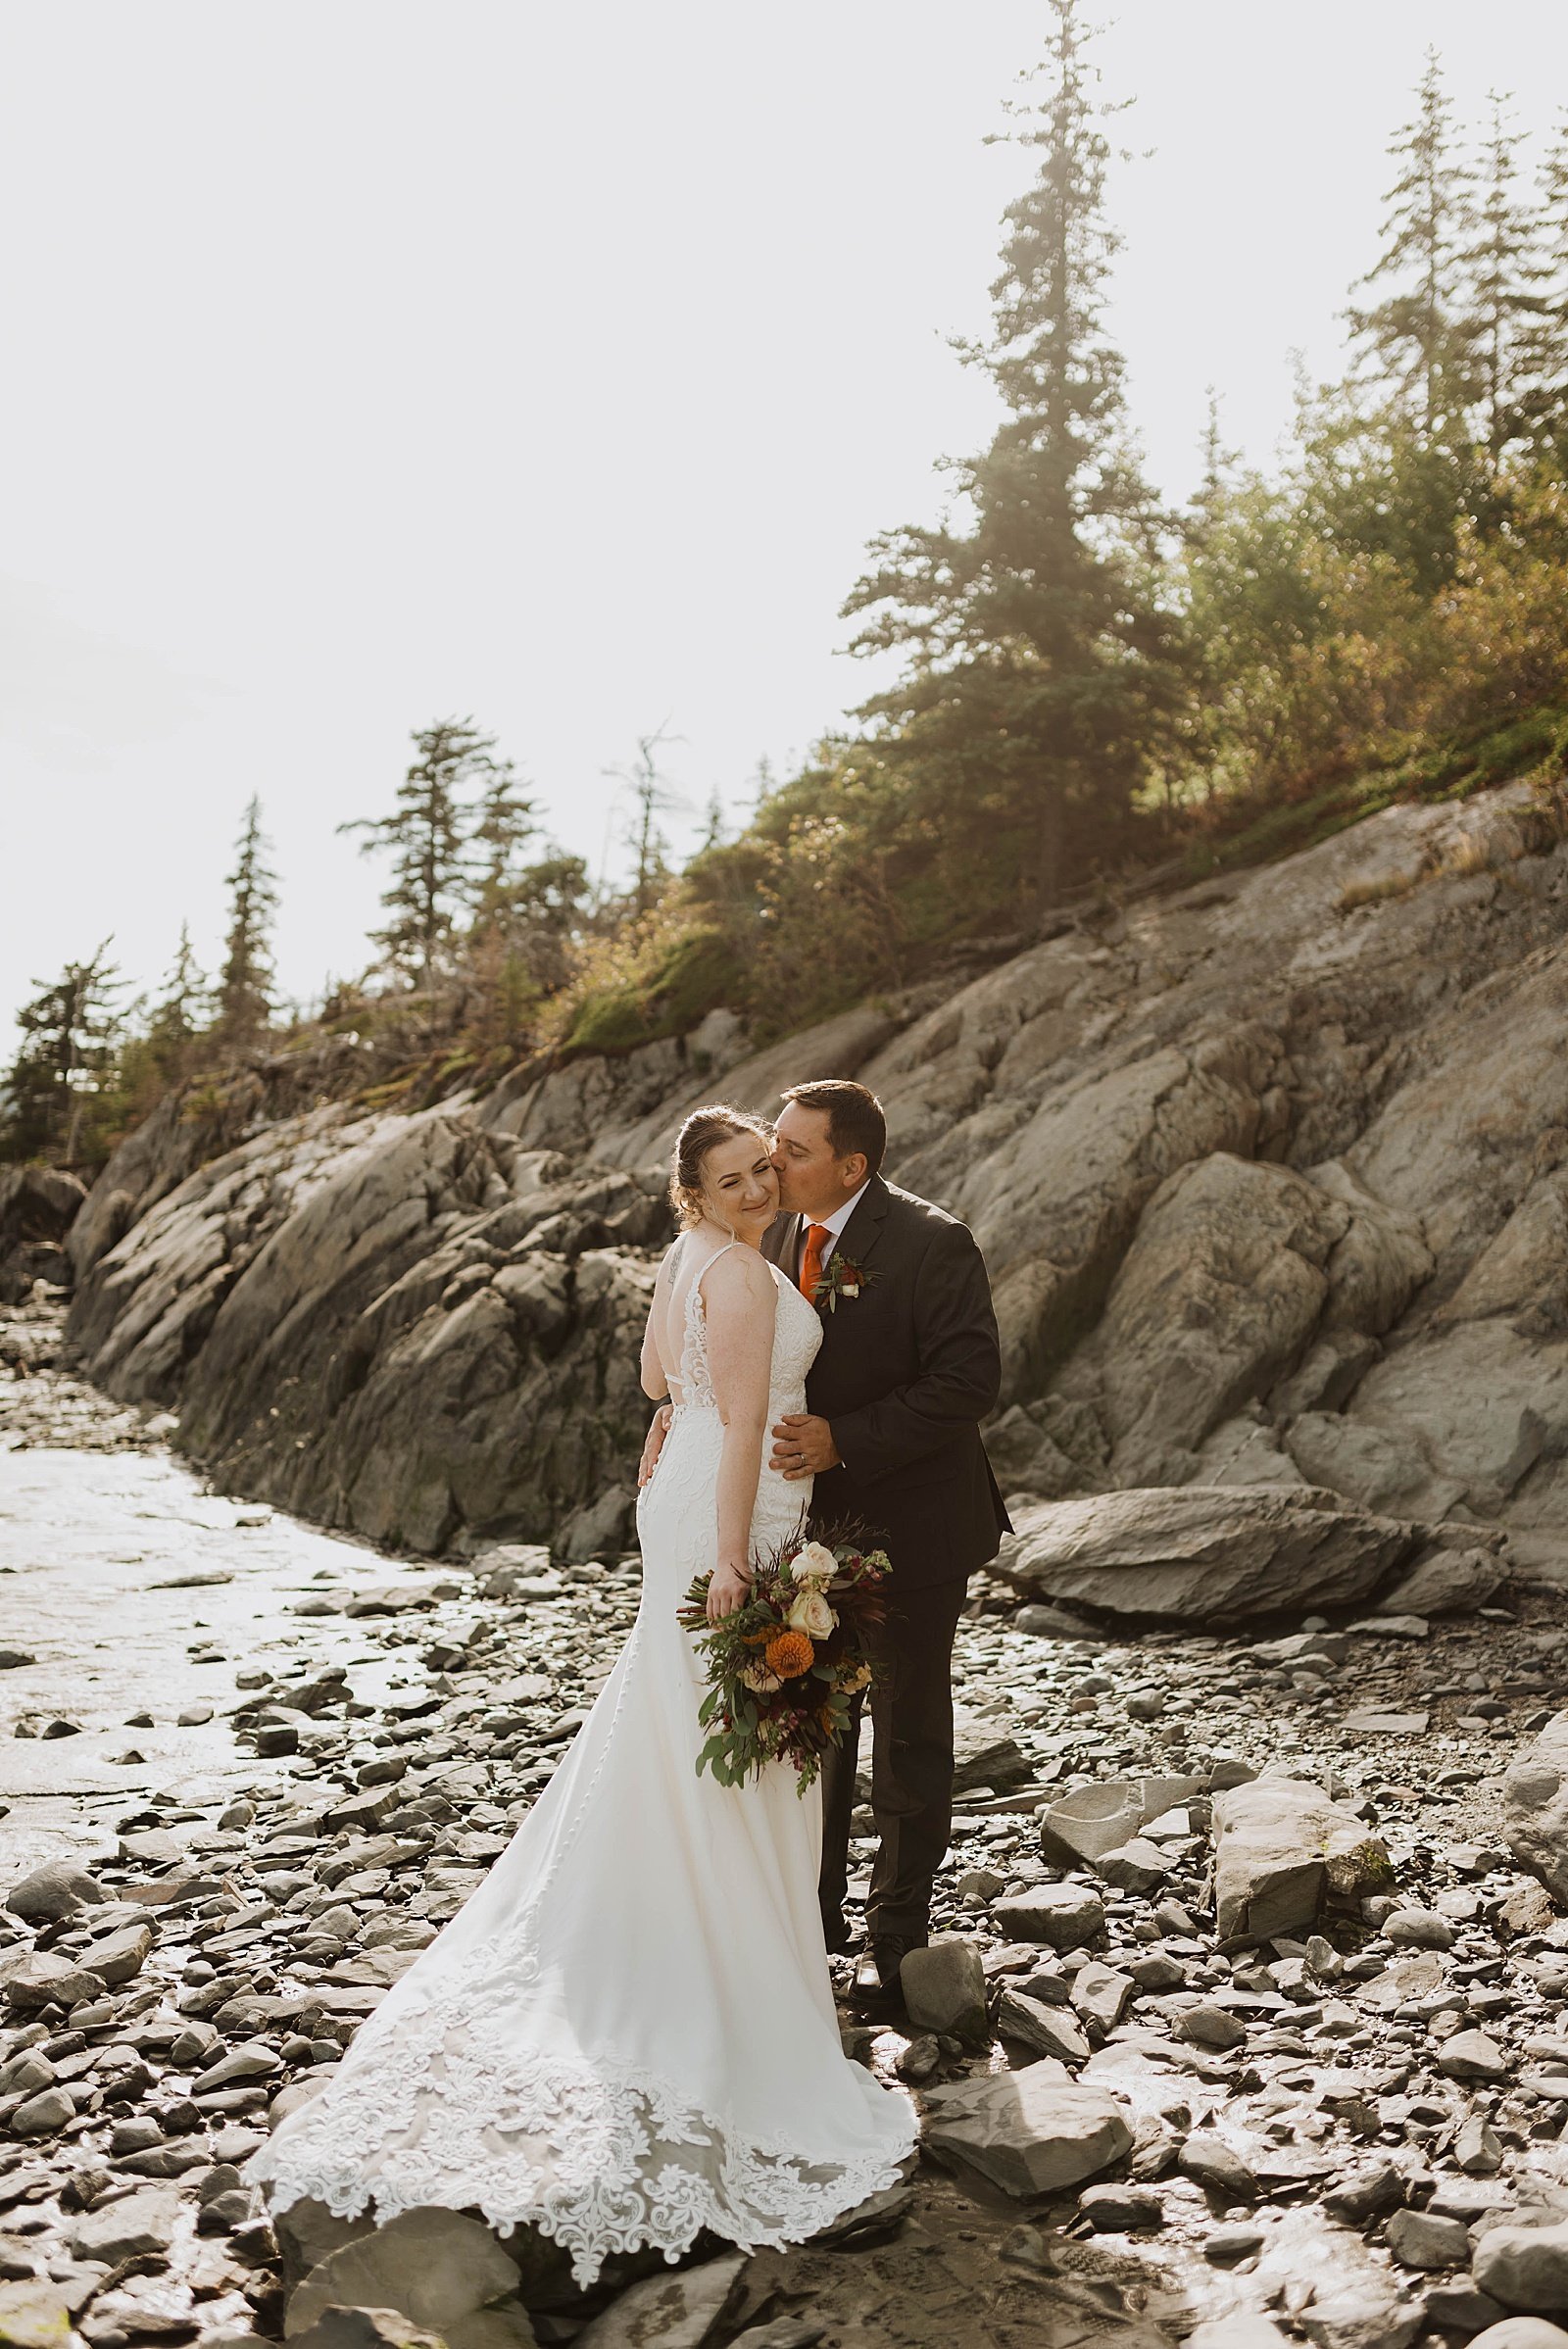  Couple in Alaska sharing a kiss after intimate wedding 